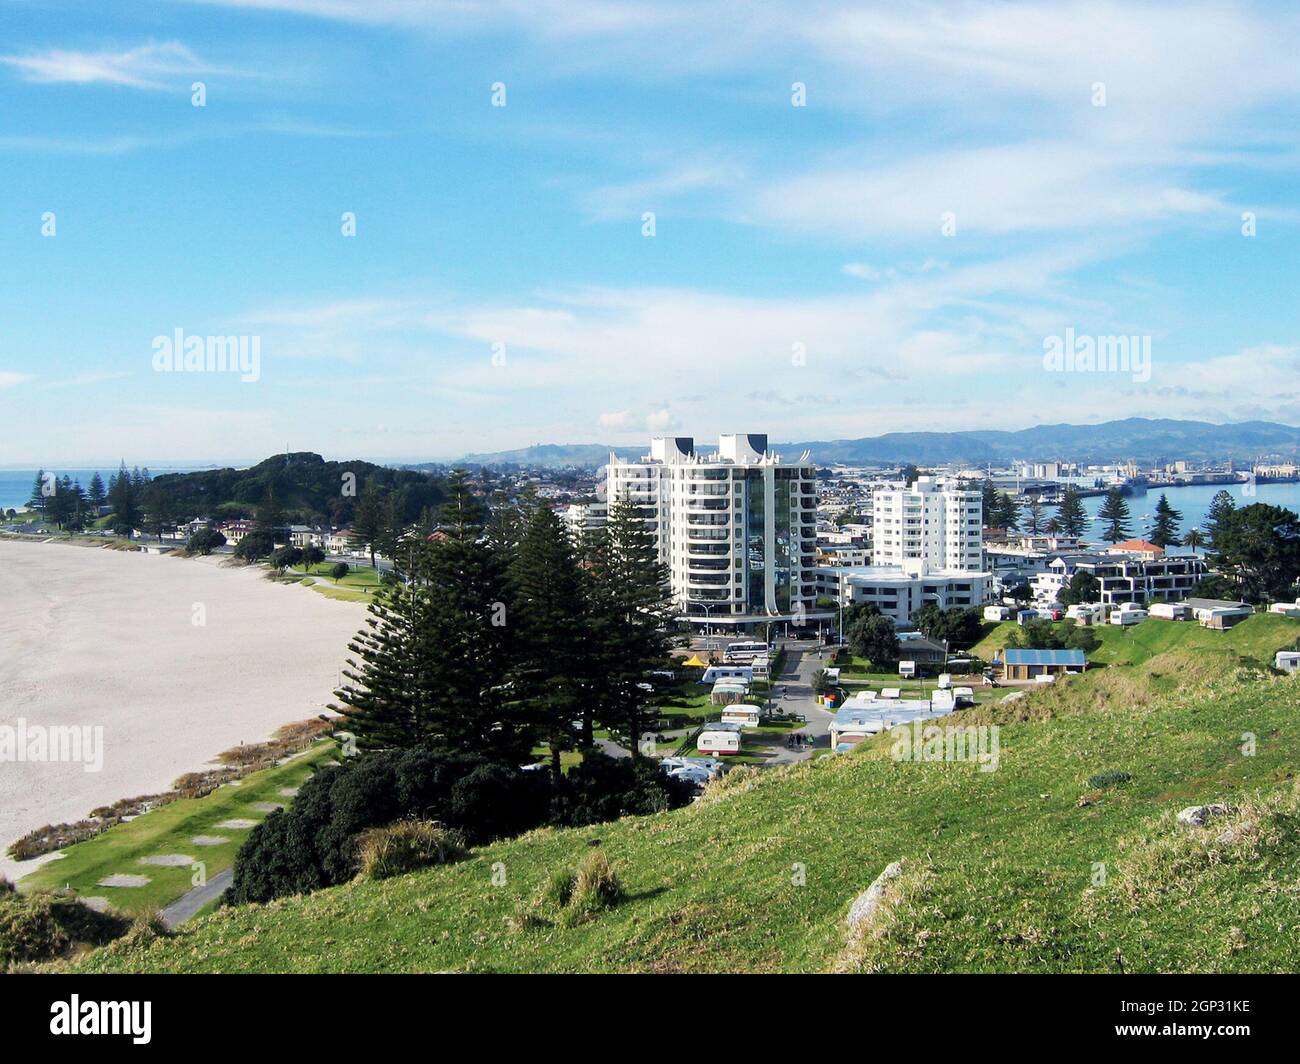 A view of Mt. Maunganui Beach and development along the seashore from atop Mt. Maunagnui, also referred to as Mauao, in the Bay of Plenty of New Zealand.  The Pacific Ocean beach side town is a popular destination especially known for its seascape and landscape. Stock Photo